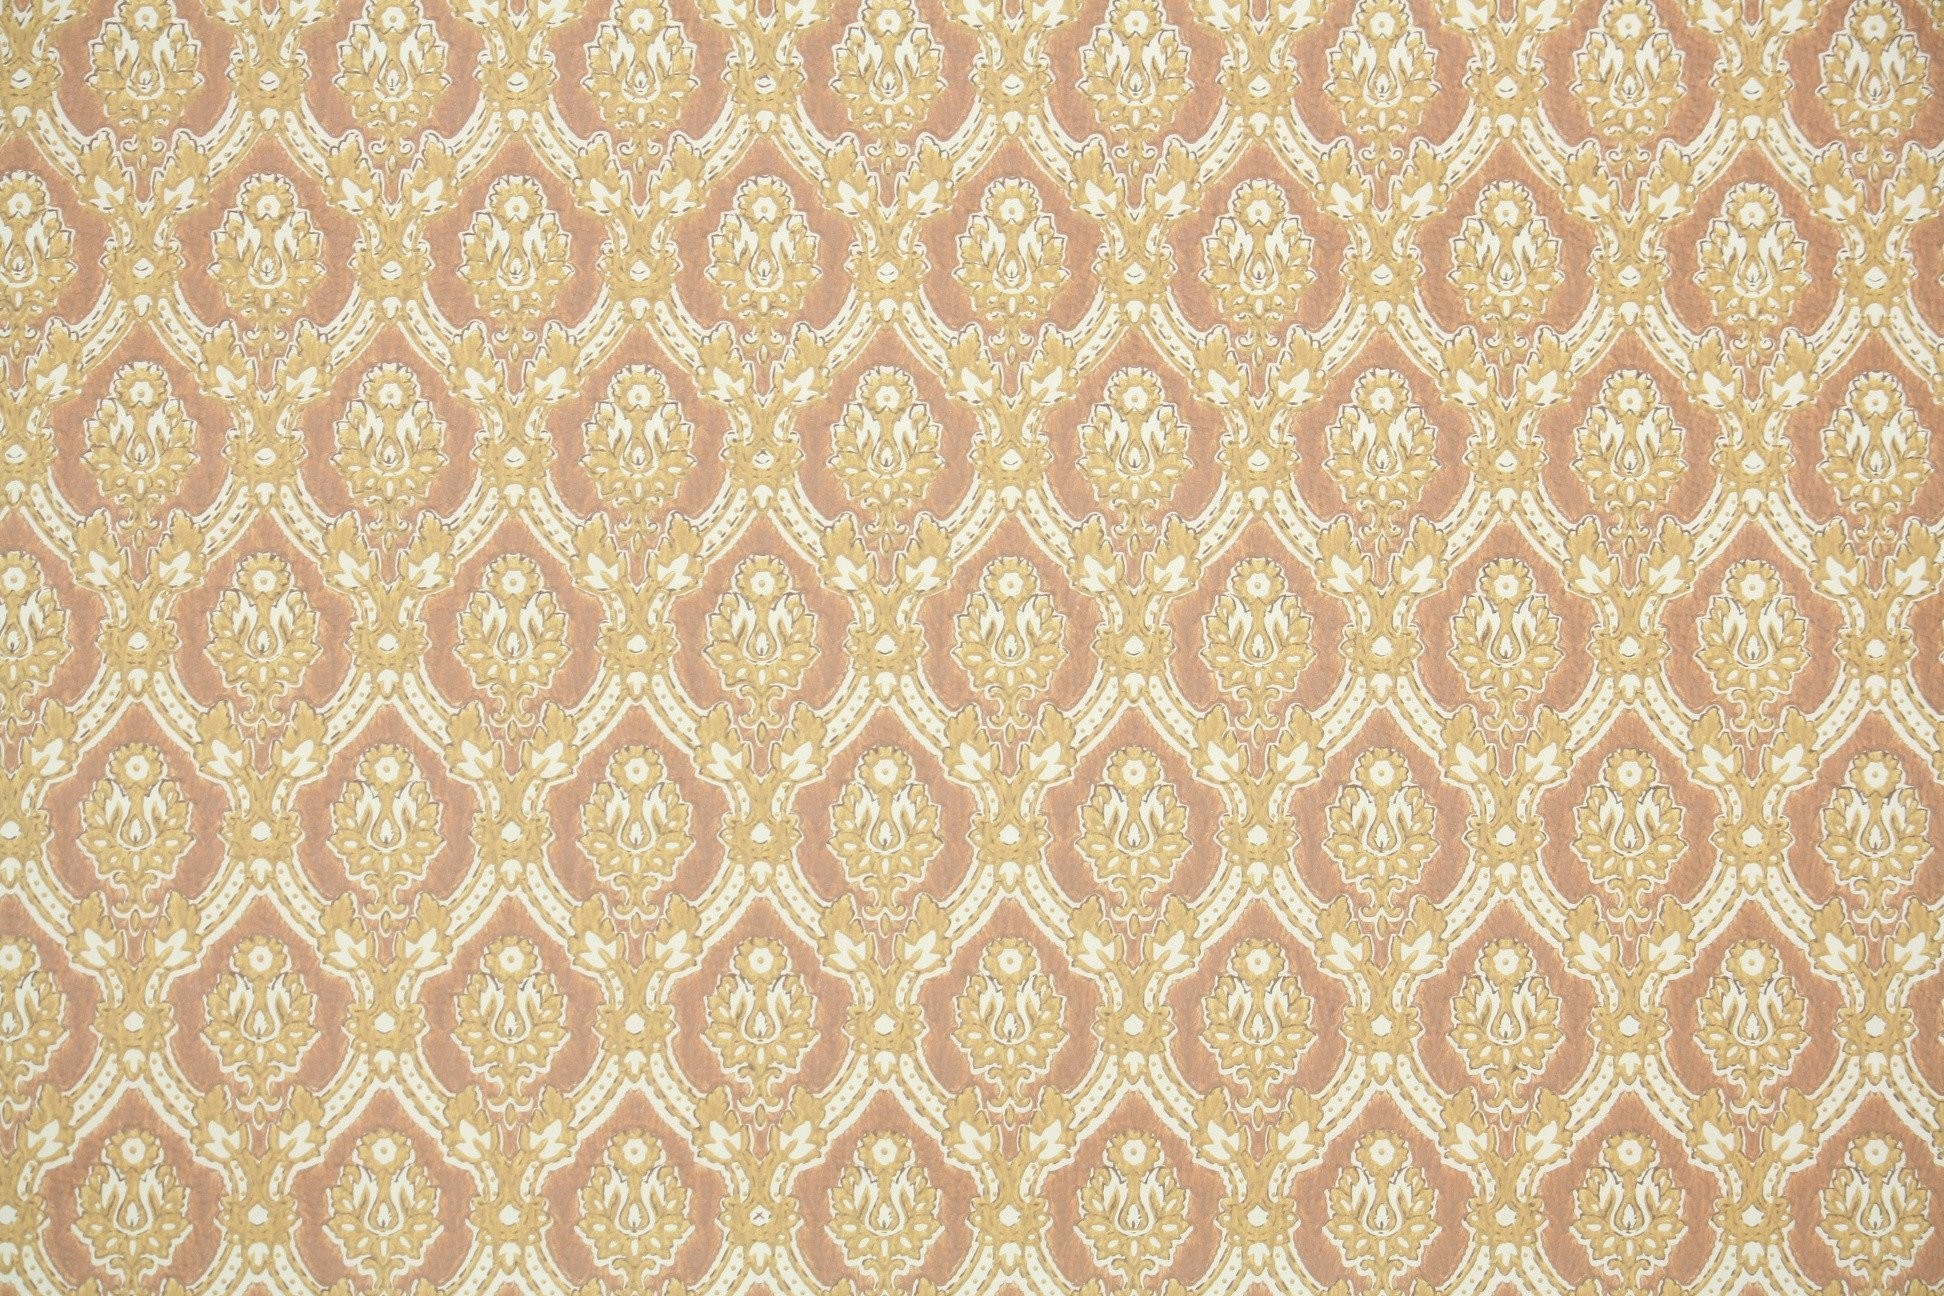 1944x1296 1960s Vintage Wallpaper by the Yard Orange and Gold Rose